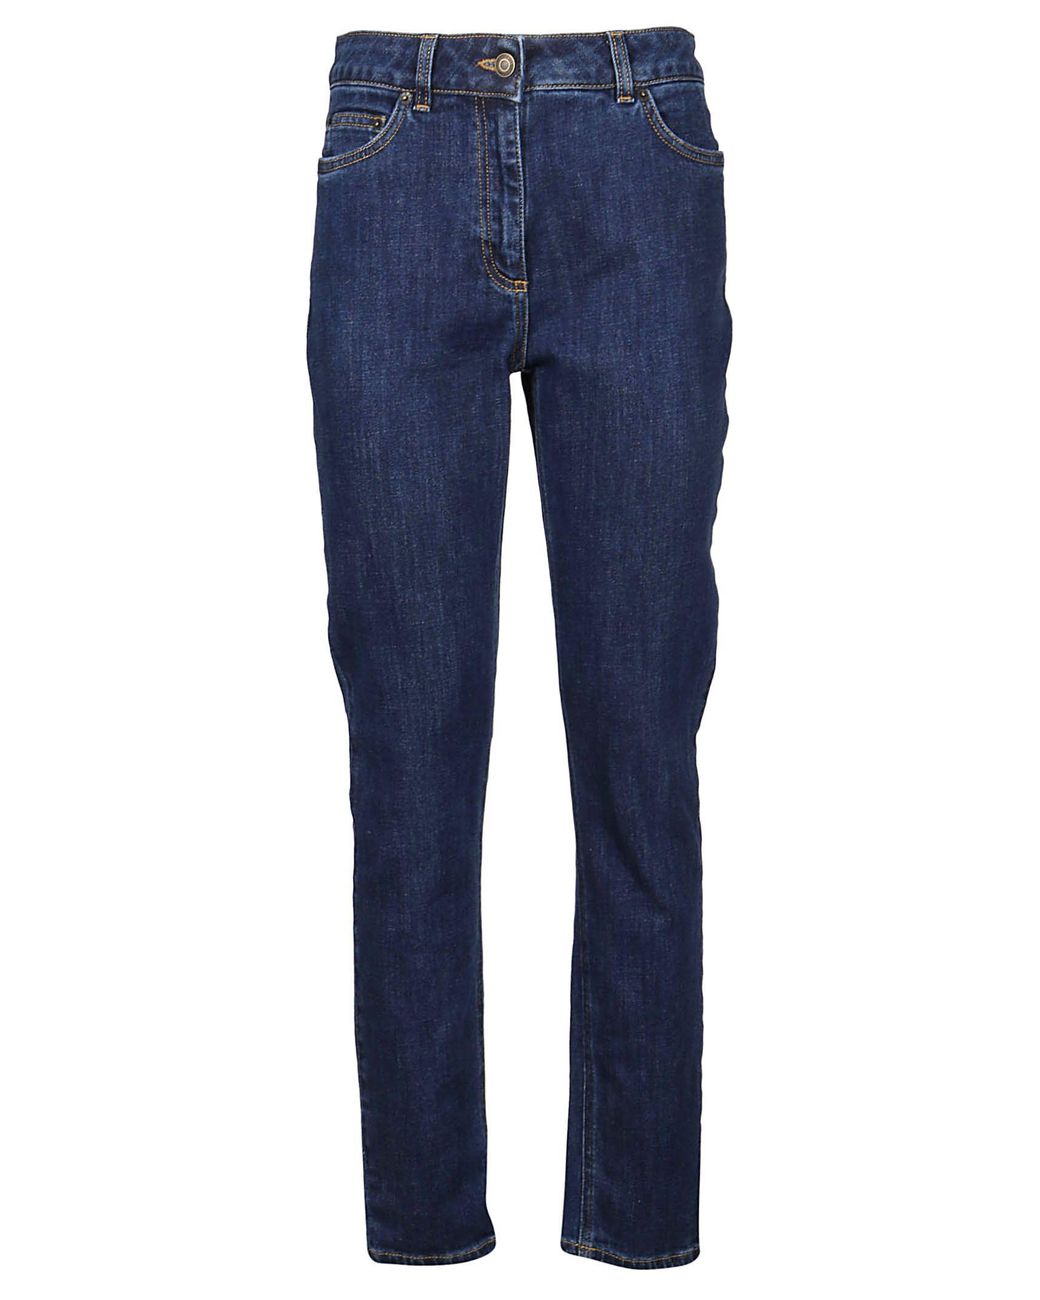 Moschino Cotton Jeans in Blue - Lyst